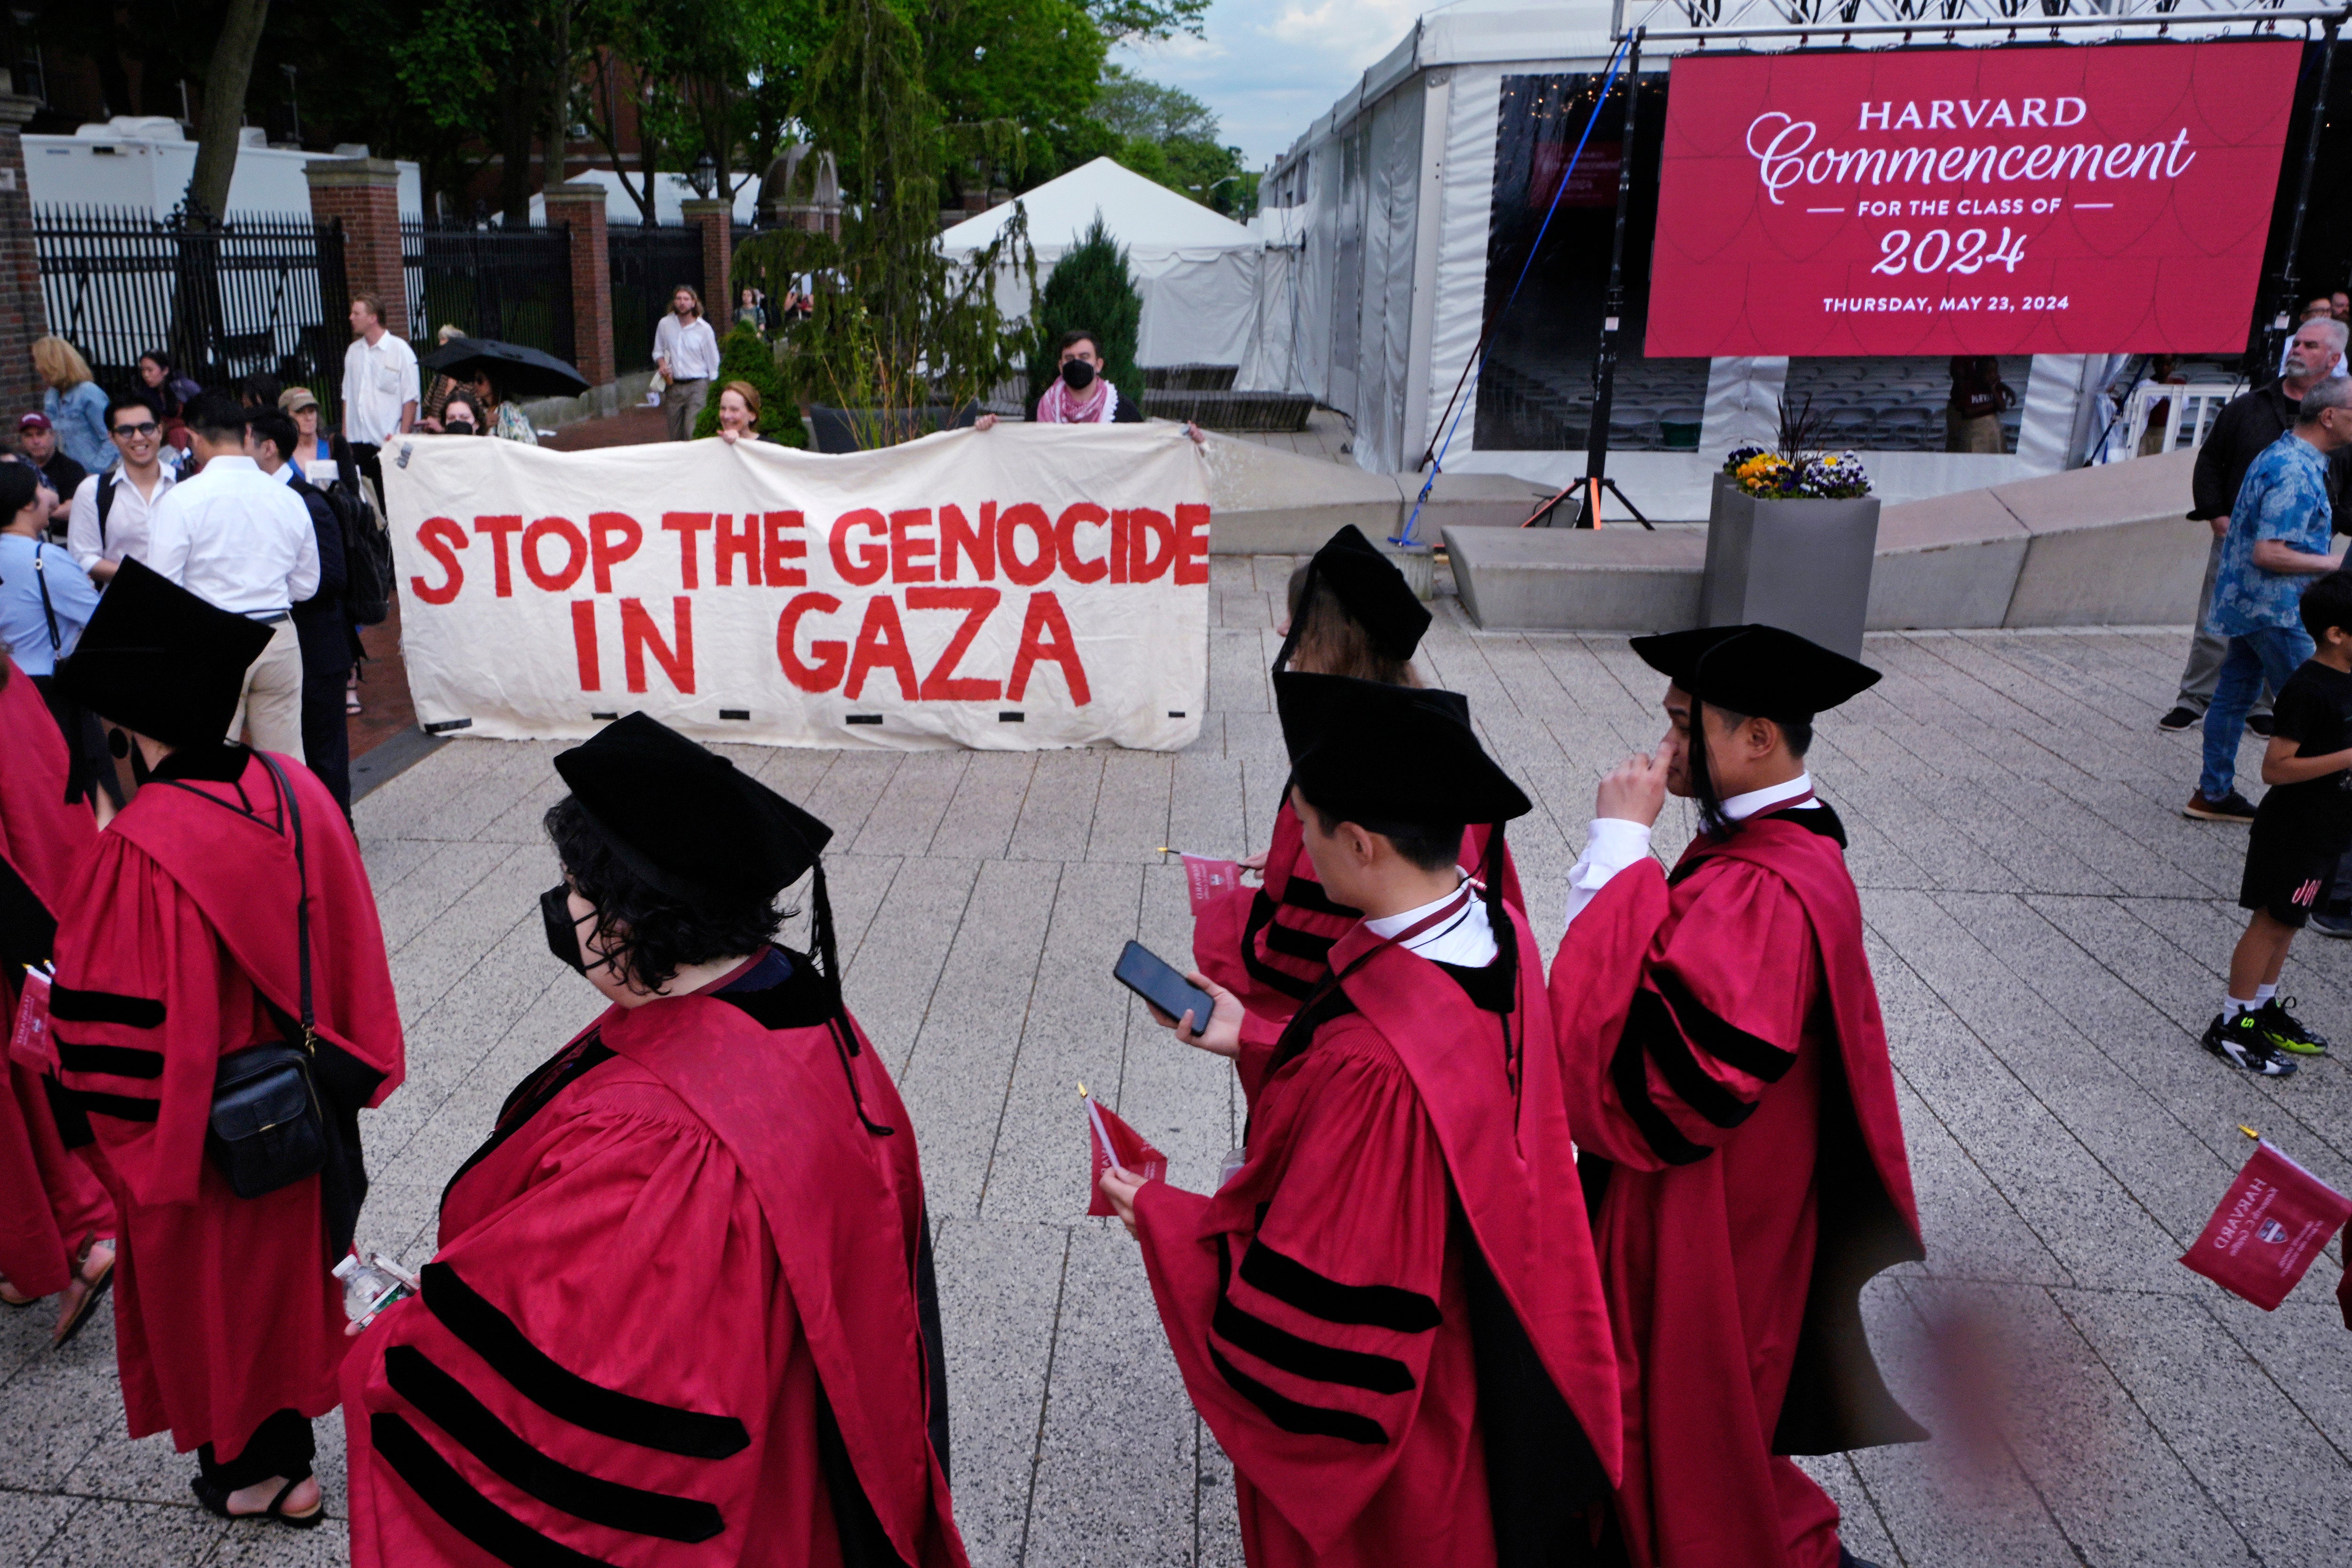 Harvard University students pass protestors while making their way into Harvard Yard for commencement on Thursday